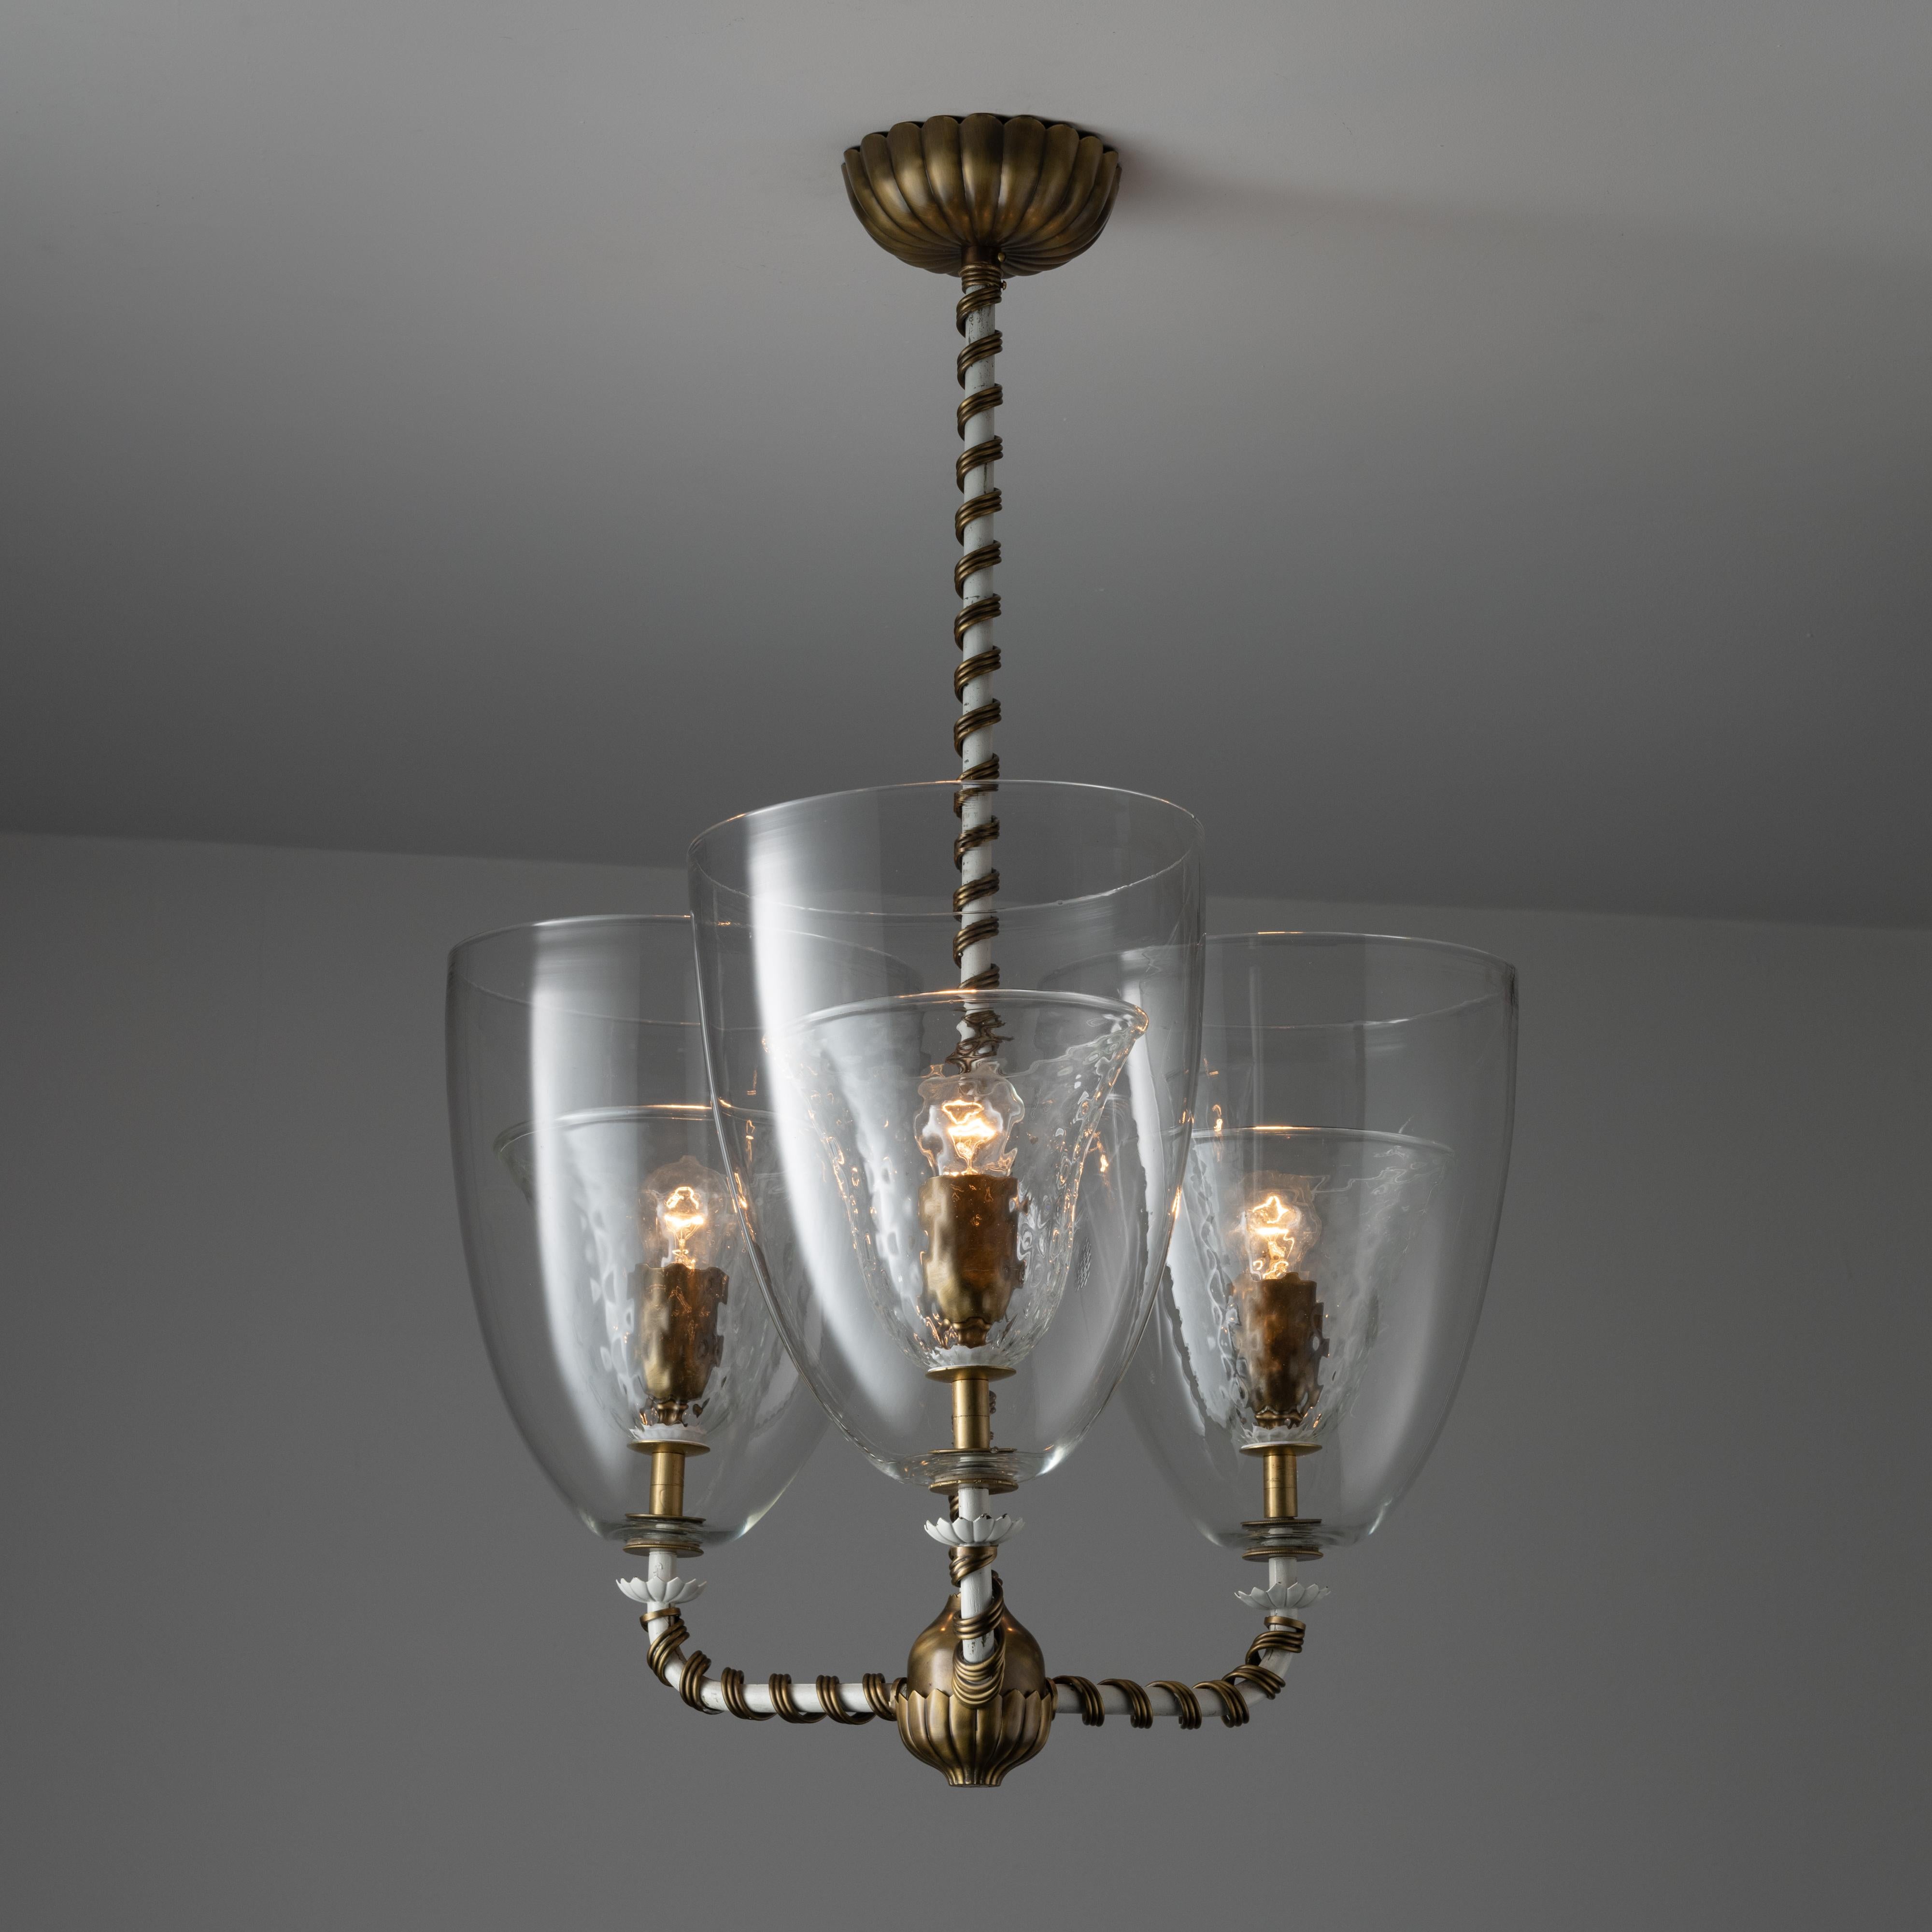 Model 5318 ceiling light by Tomaso Buzzi for Venini. Designed and manufactured in Italy, circa 1940. Three-shade ceiling light with white enameled frame and wrapped brass candy cane detailing. The shades contain an exterior glass shell and a